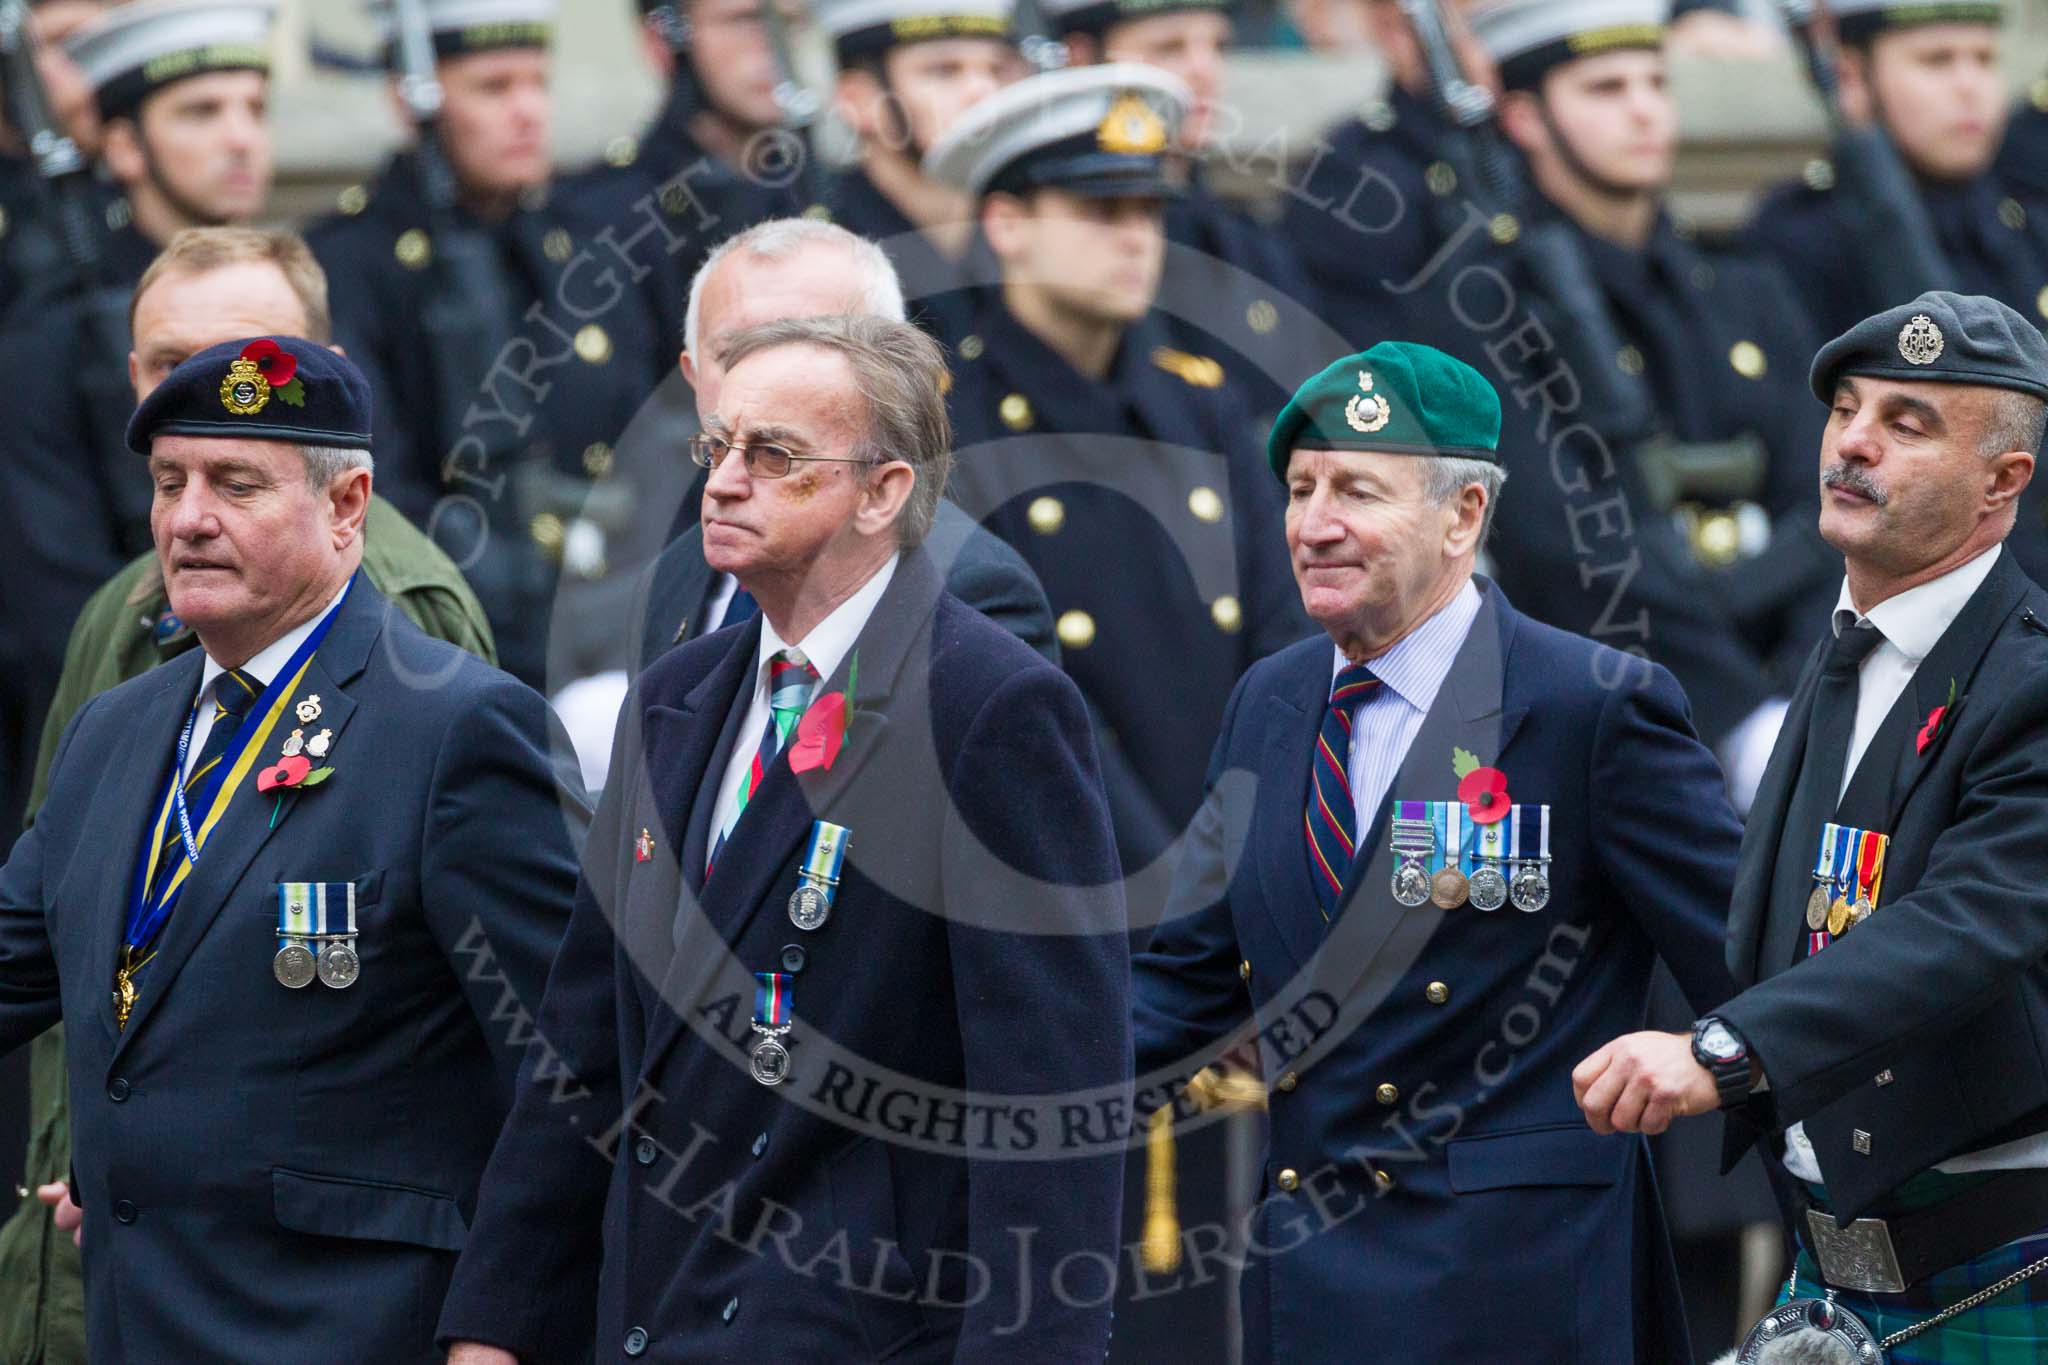 Remembrance Sunday at the Cenotaph 2015: Group D10, South Atlantic Medal Association.
Cenotaph, Whitehall, London SW1,
London,
Greater London,
United Kingdom,
on 08 November 2015 at 11:53, image #636